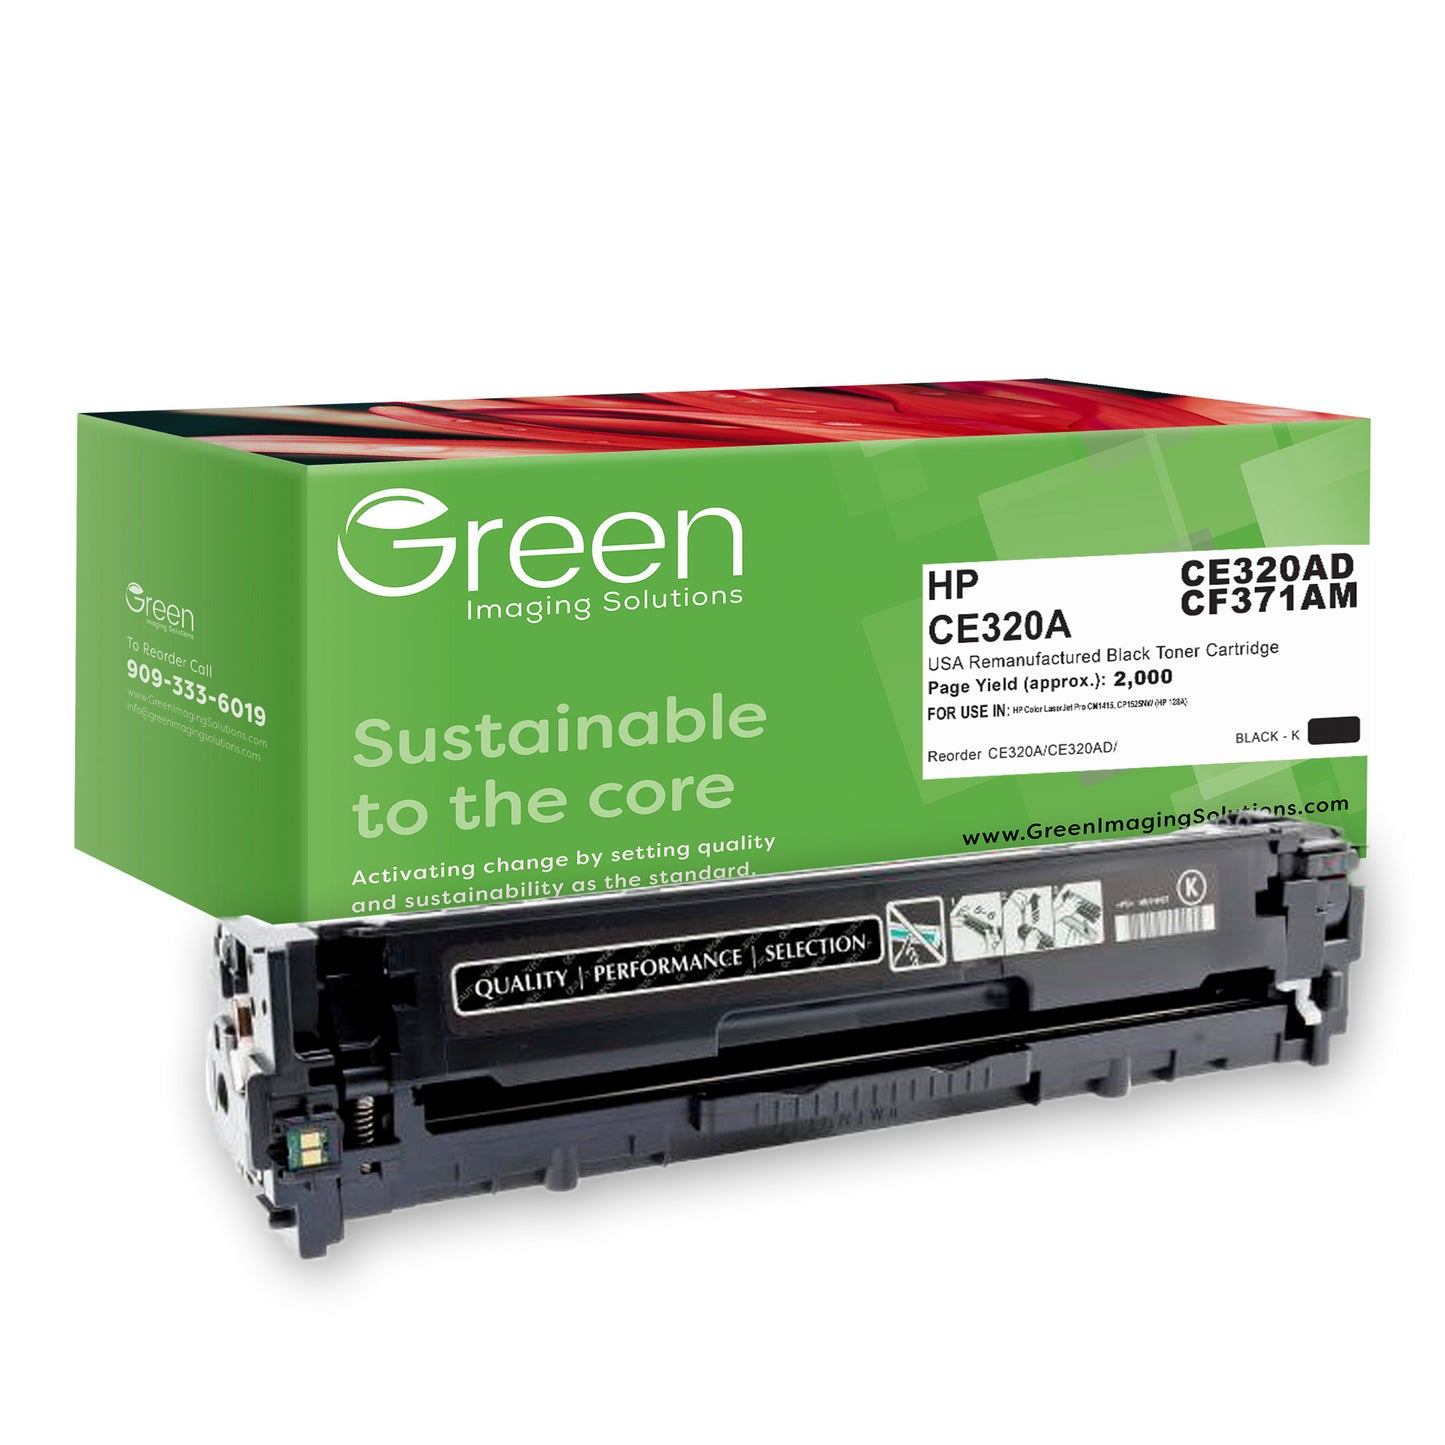 GIS USA Remanufactured Black Toner Cartridge for HP CE320A (HP 128A)